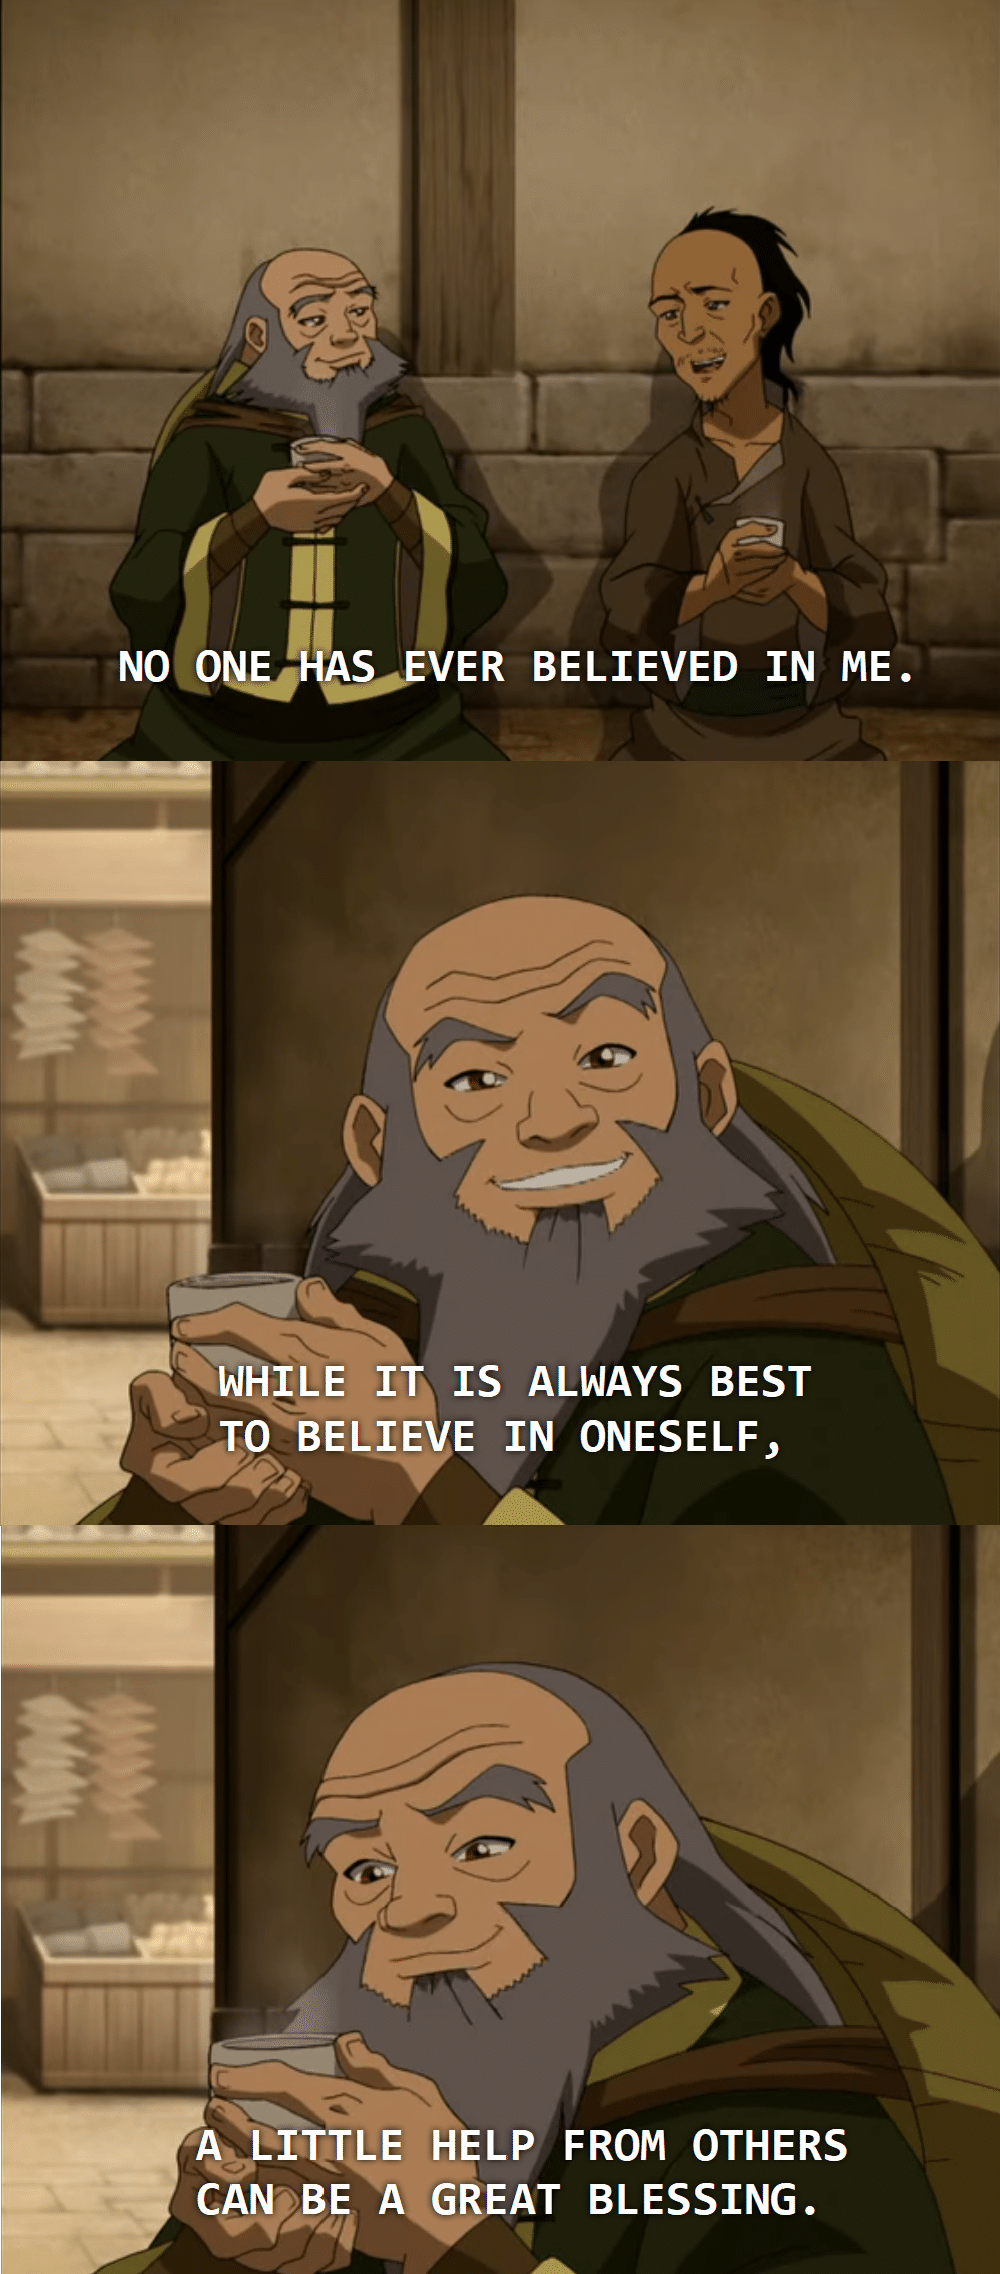 Wholesome memes, Iroh, Netflix, Uncle Iroh, Ba Sing Se, Zuko Wholesome Memes Wholesome memes, Iroh, Netflix, Uncle Iroh, Ba Sing Se, Zuko text: NO VER BELIEVED IN ME. WHILE ITi IS ALWAYS BEST TO BELIEVE IN ONESELF, HELP FROM OTHERS CAPUBE A GREAT BLESSING. 